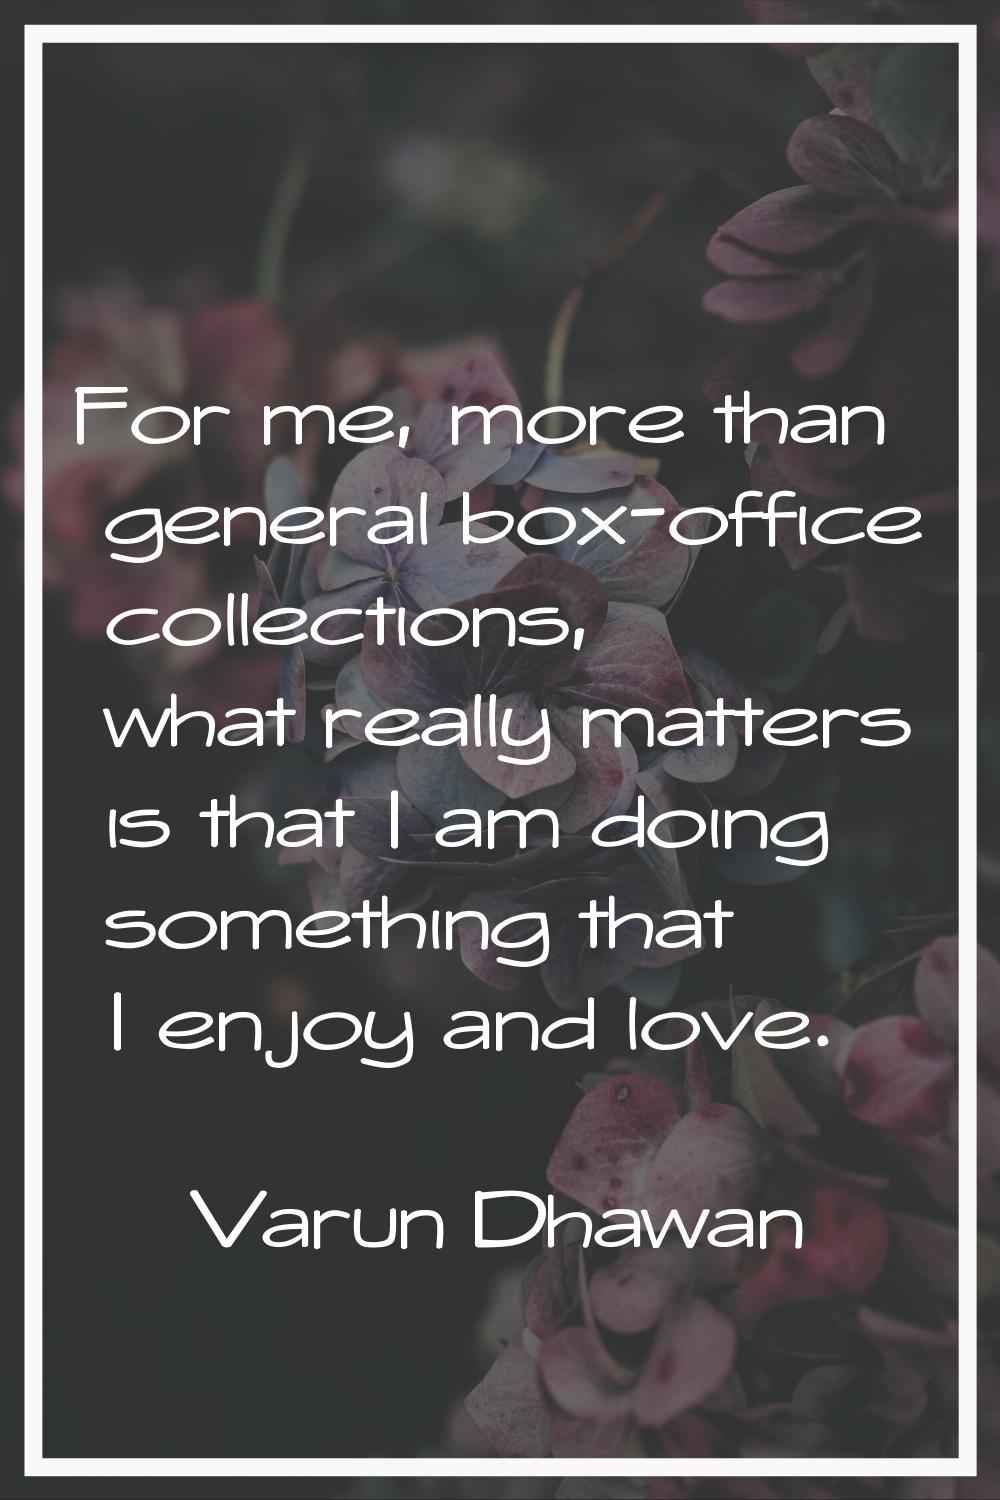 For me, more than general box-office collections, what really matters is that I am doing something 